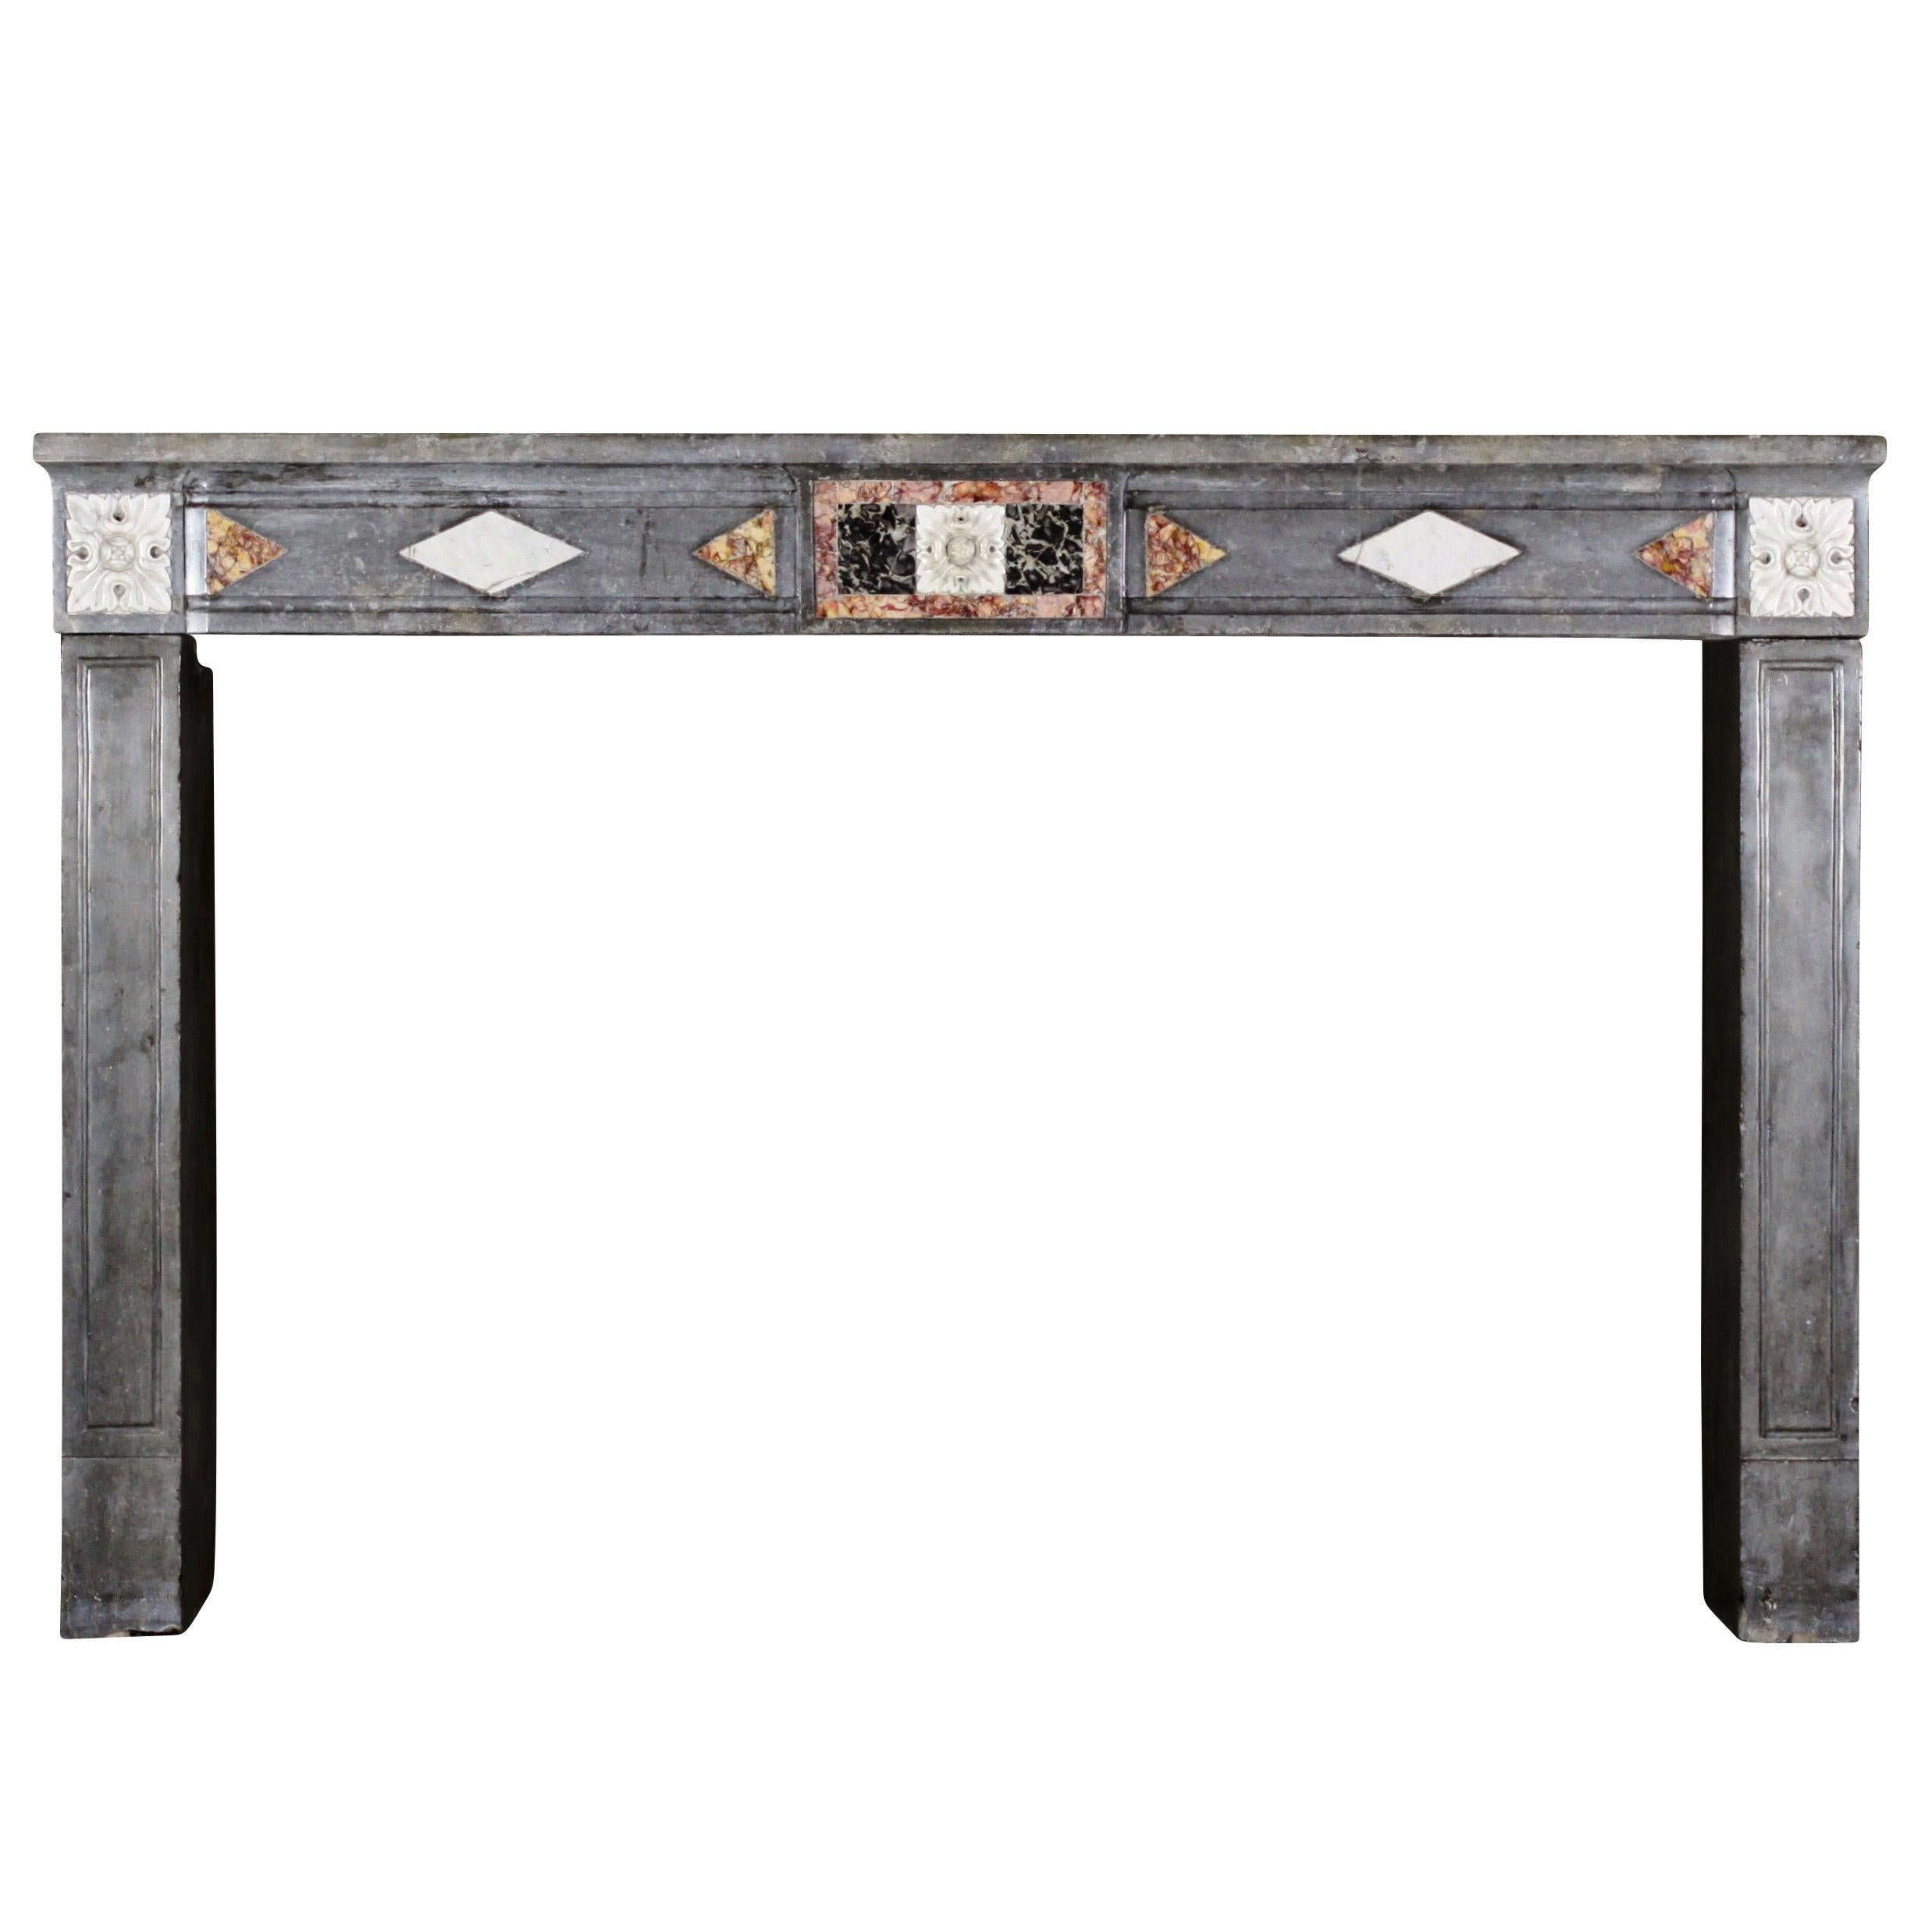 Fine European Rustic Antique Fireplace Surround with Marble Inlays